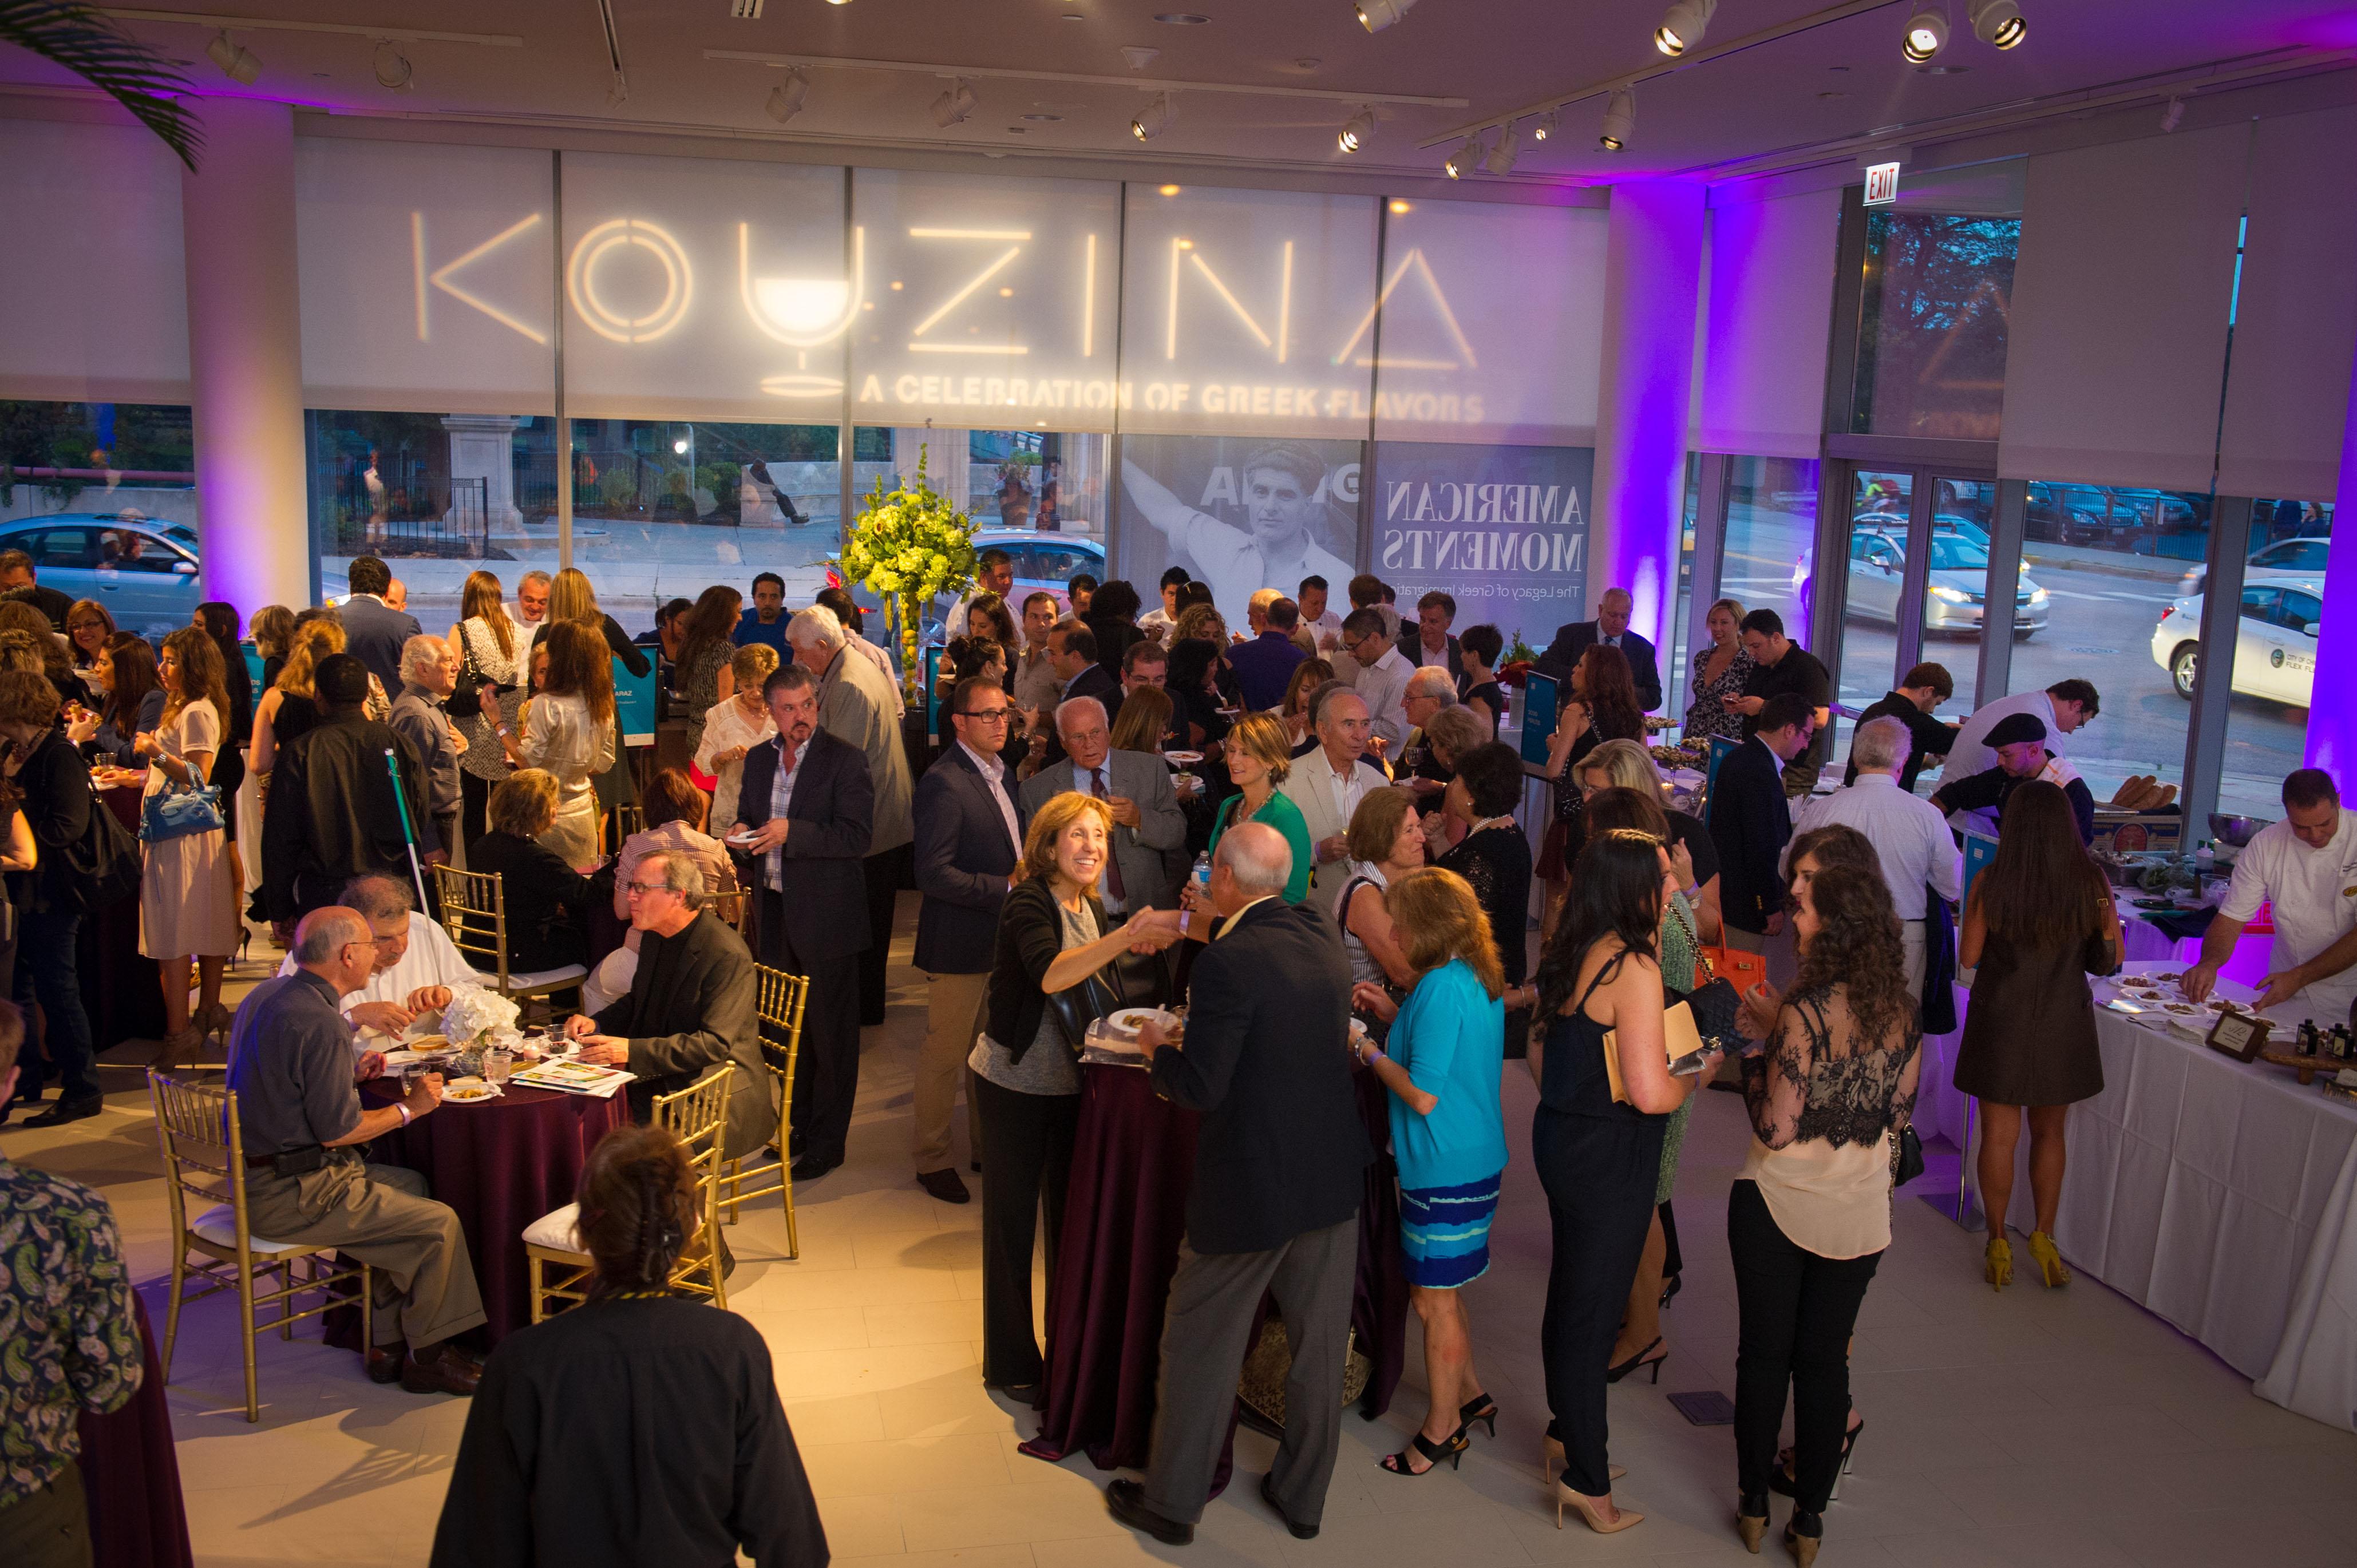 Night at the museum: Raise a glass while raising funds for a local museum at Kouzina. (Courtesy of the National Hellenic Museum)